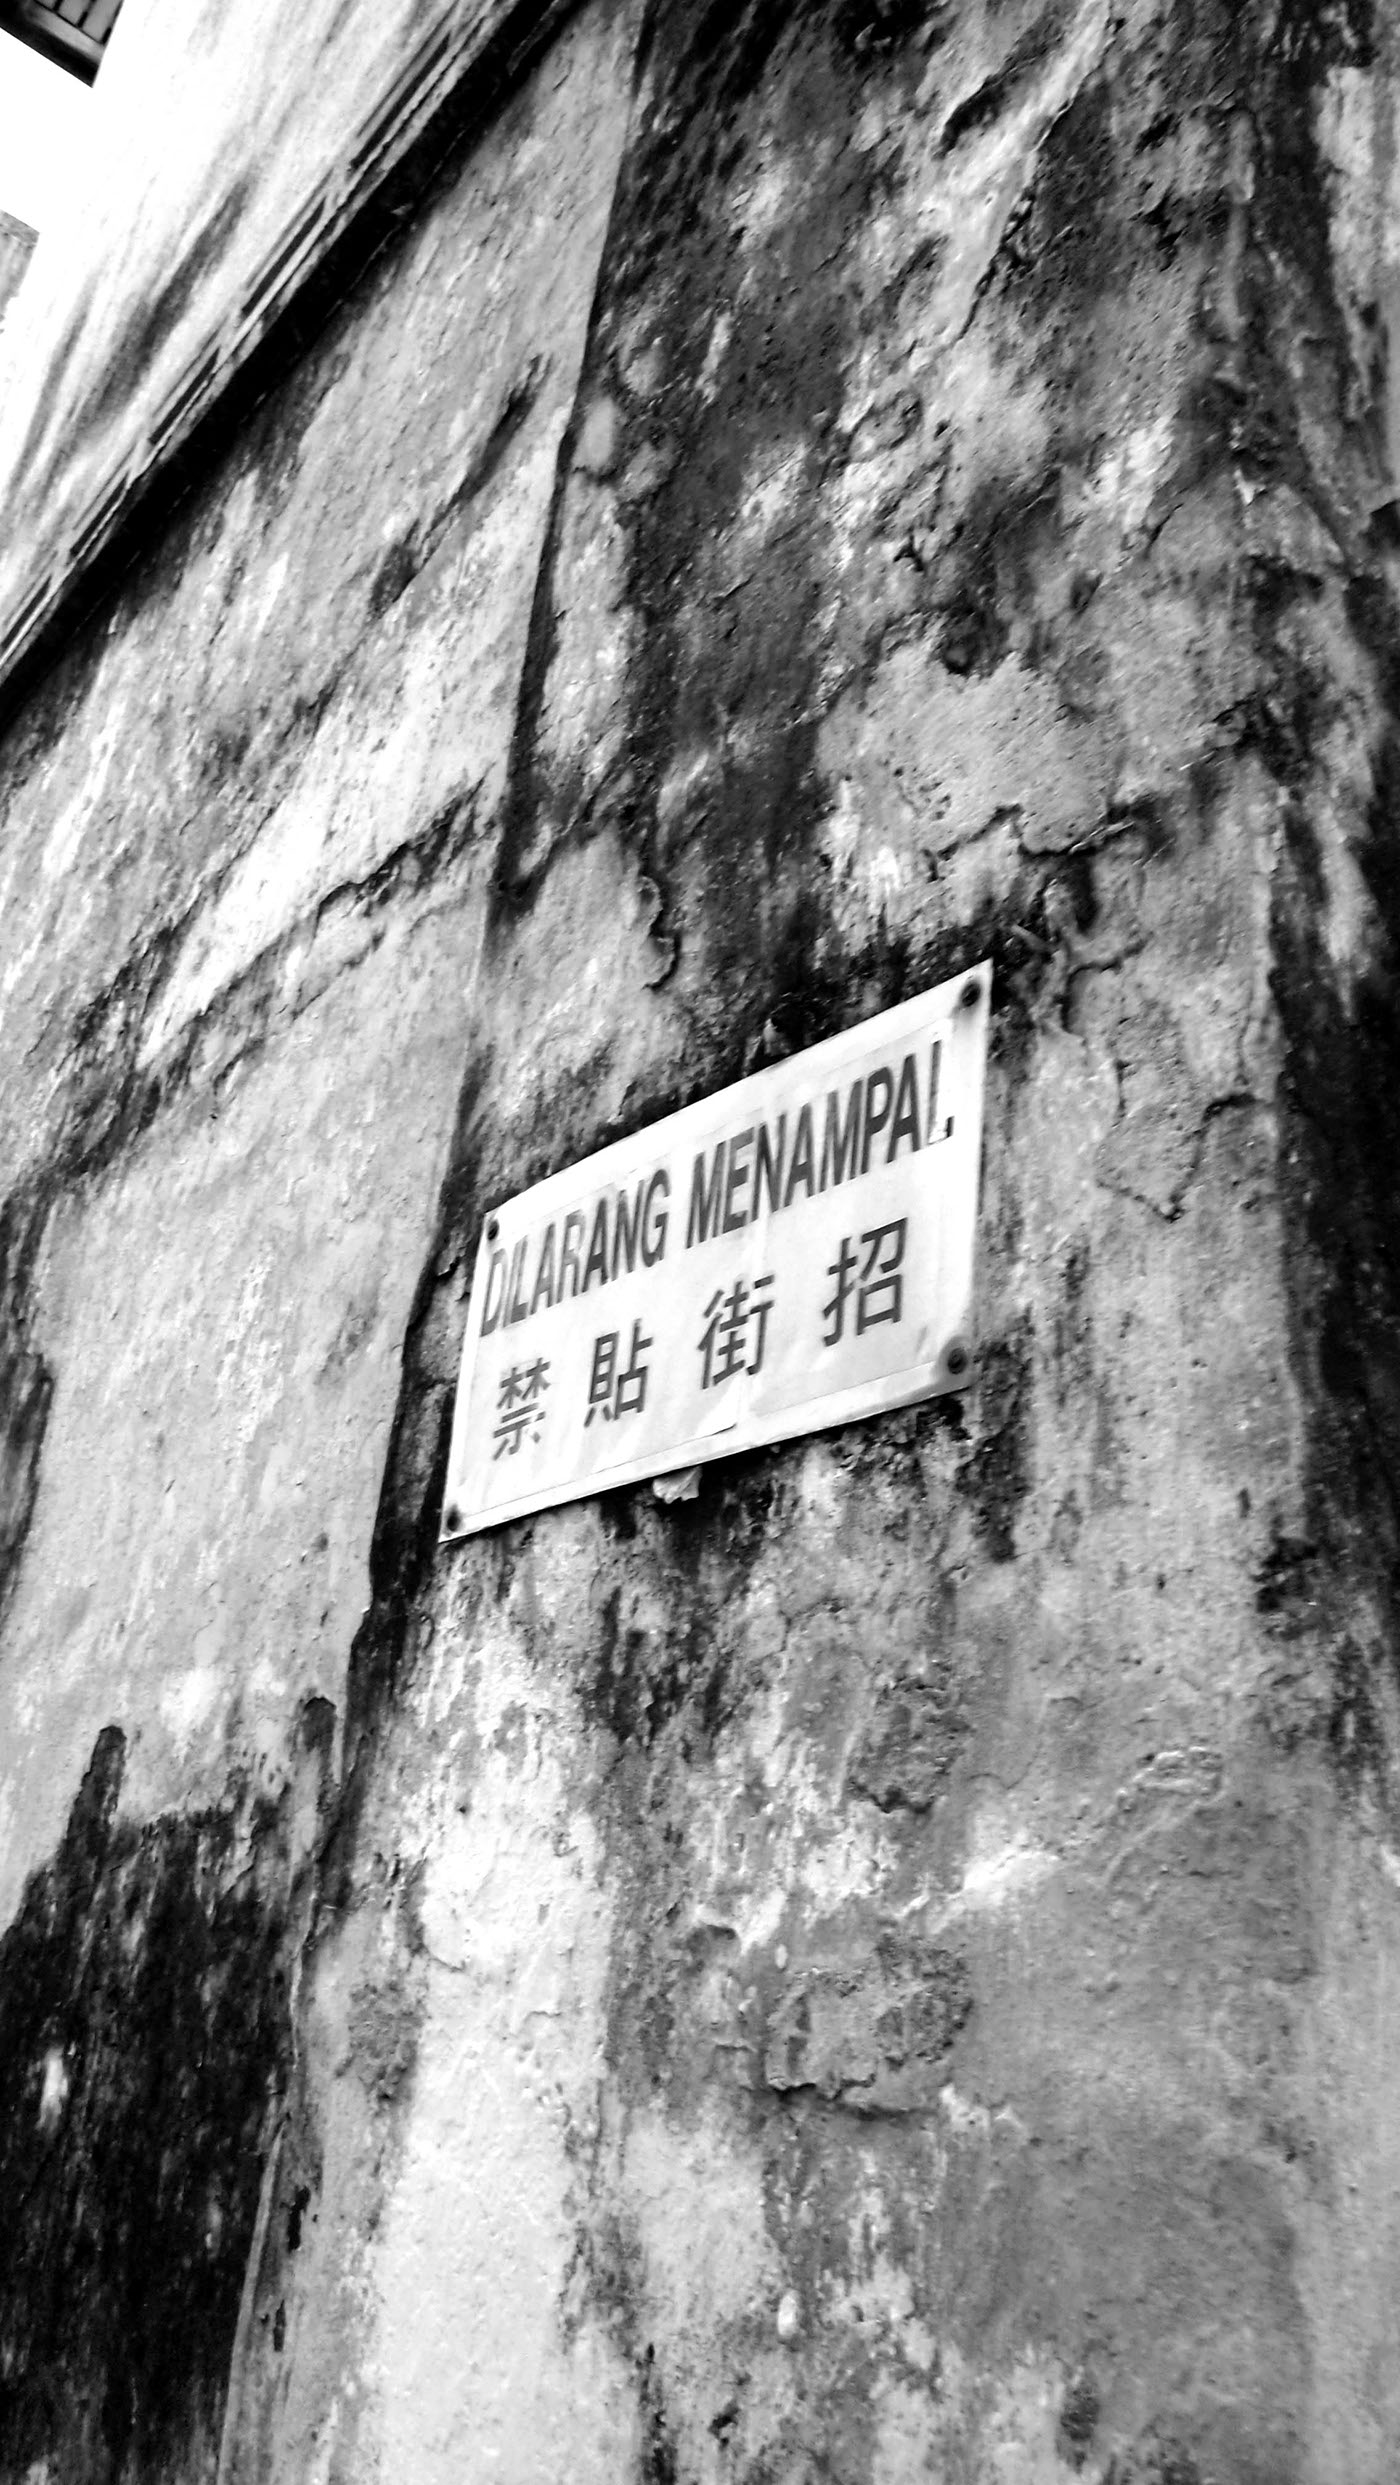 ipoh malaysia old town city downtown british bw photo photographer journal memories